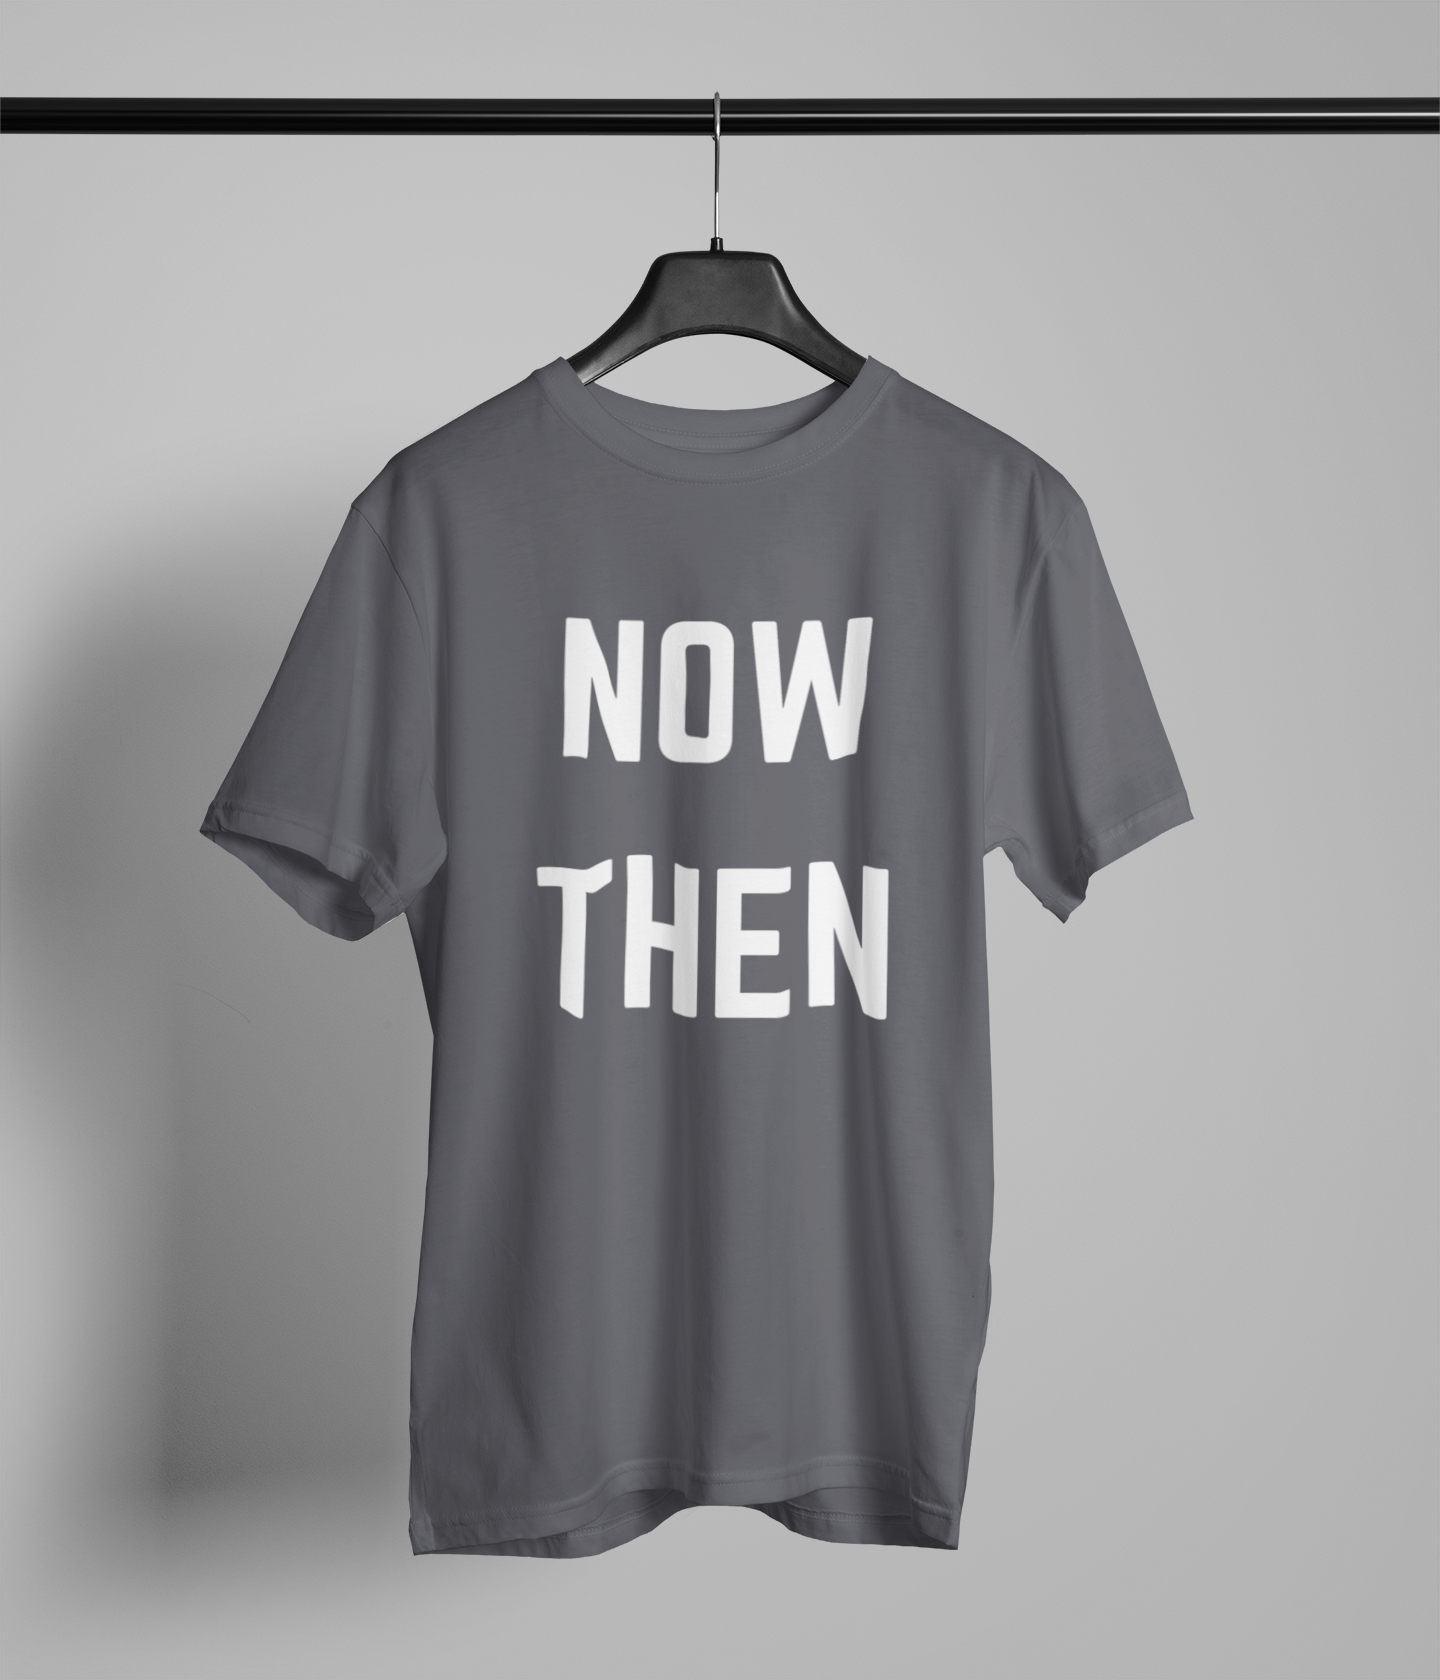 NOW THEN Northern Slang T-Shirt Unisex